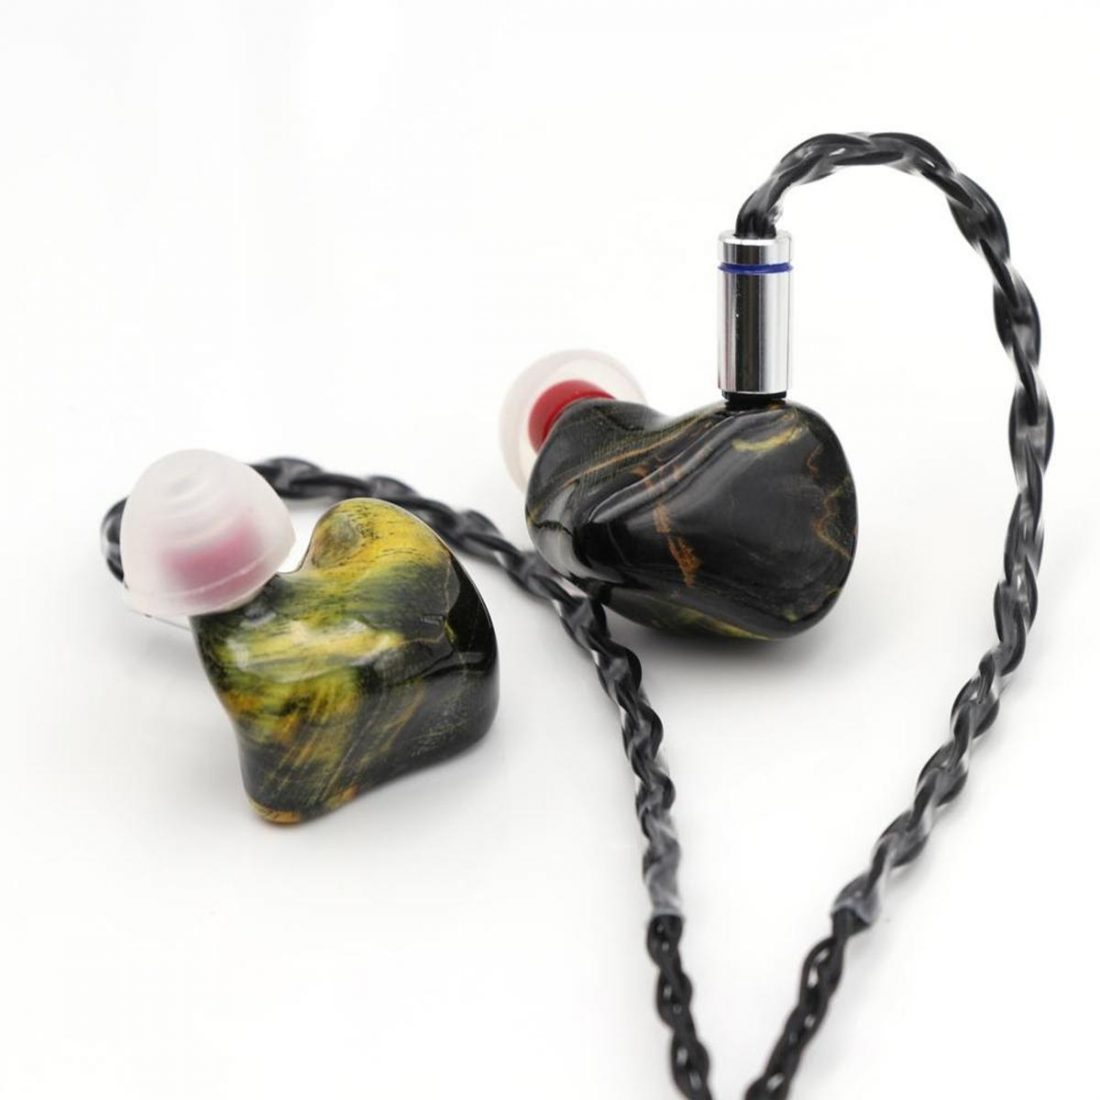 The TOTL Thieaudio Legacy 9 IEMs. (From linsoul.com)